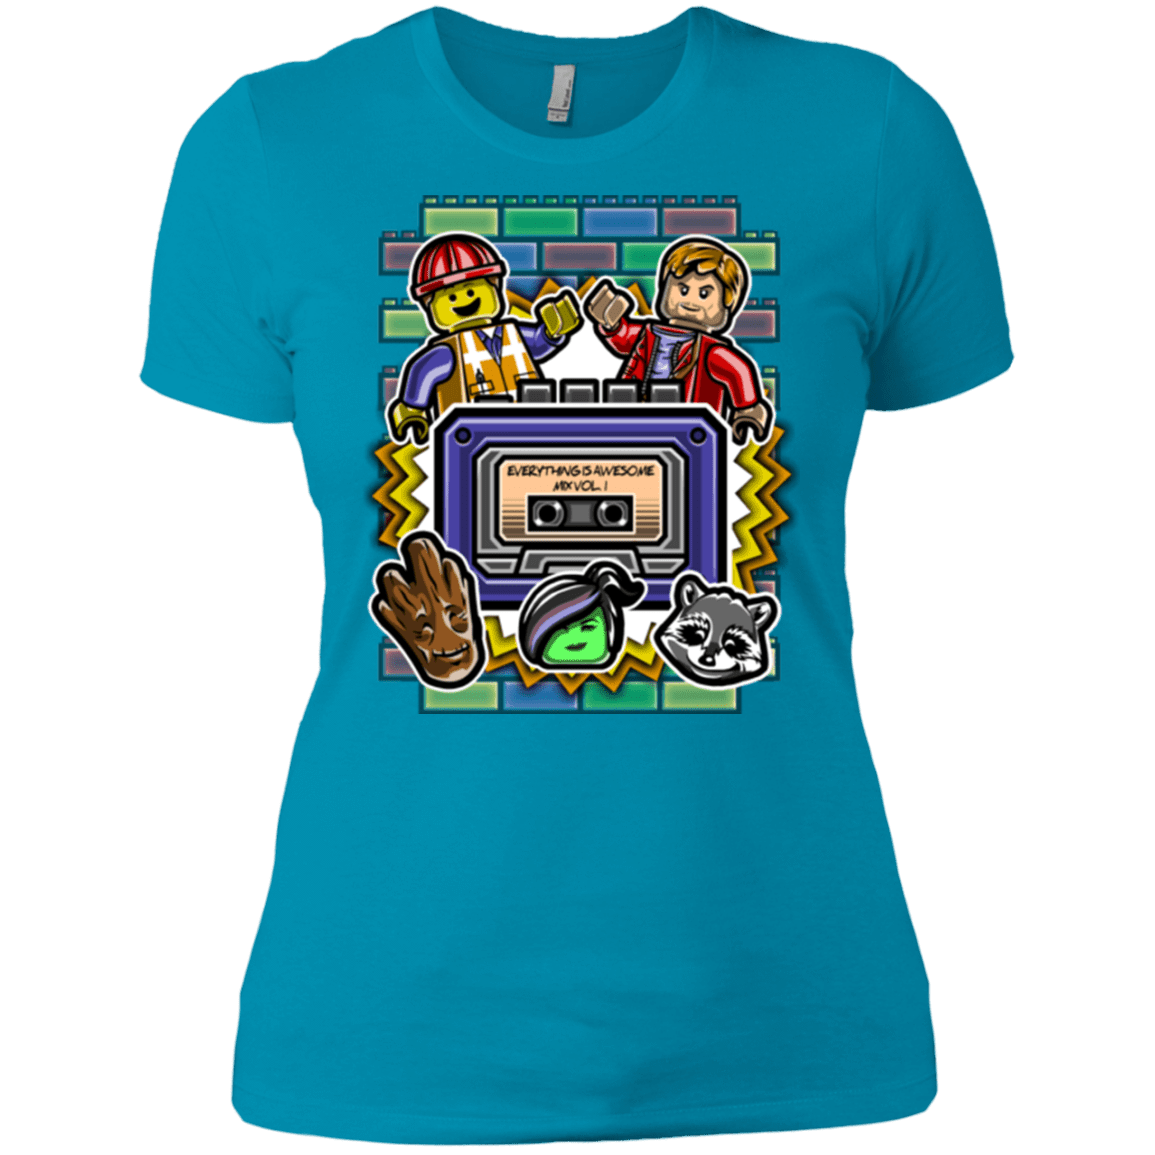 T-Shirts Turquoise / X-Small Everything is awesome mix Women's Premium T-Shirt